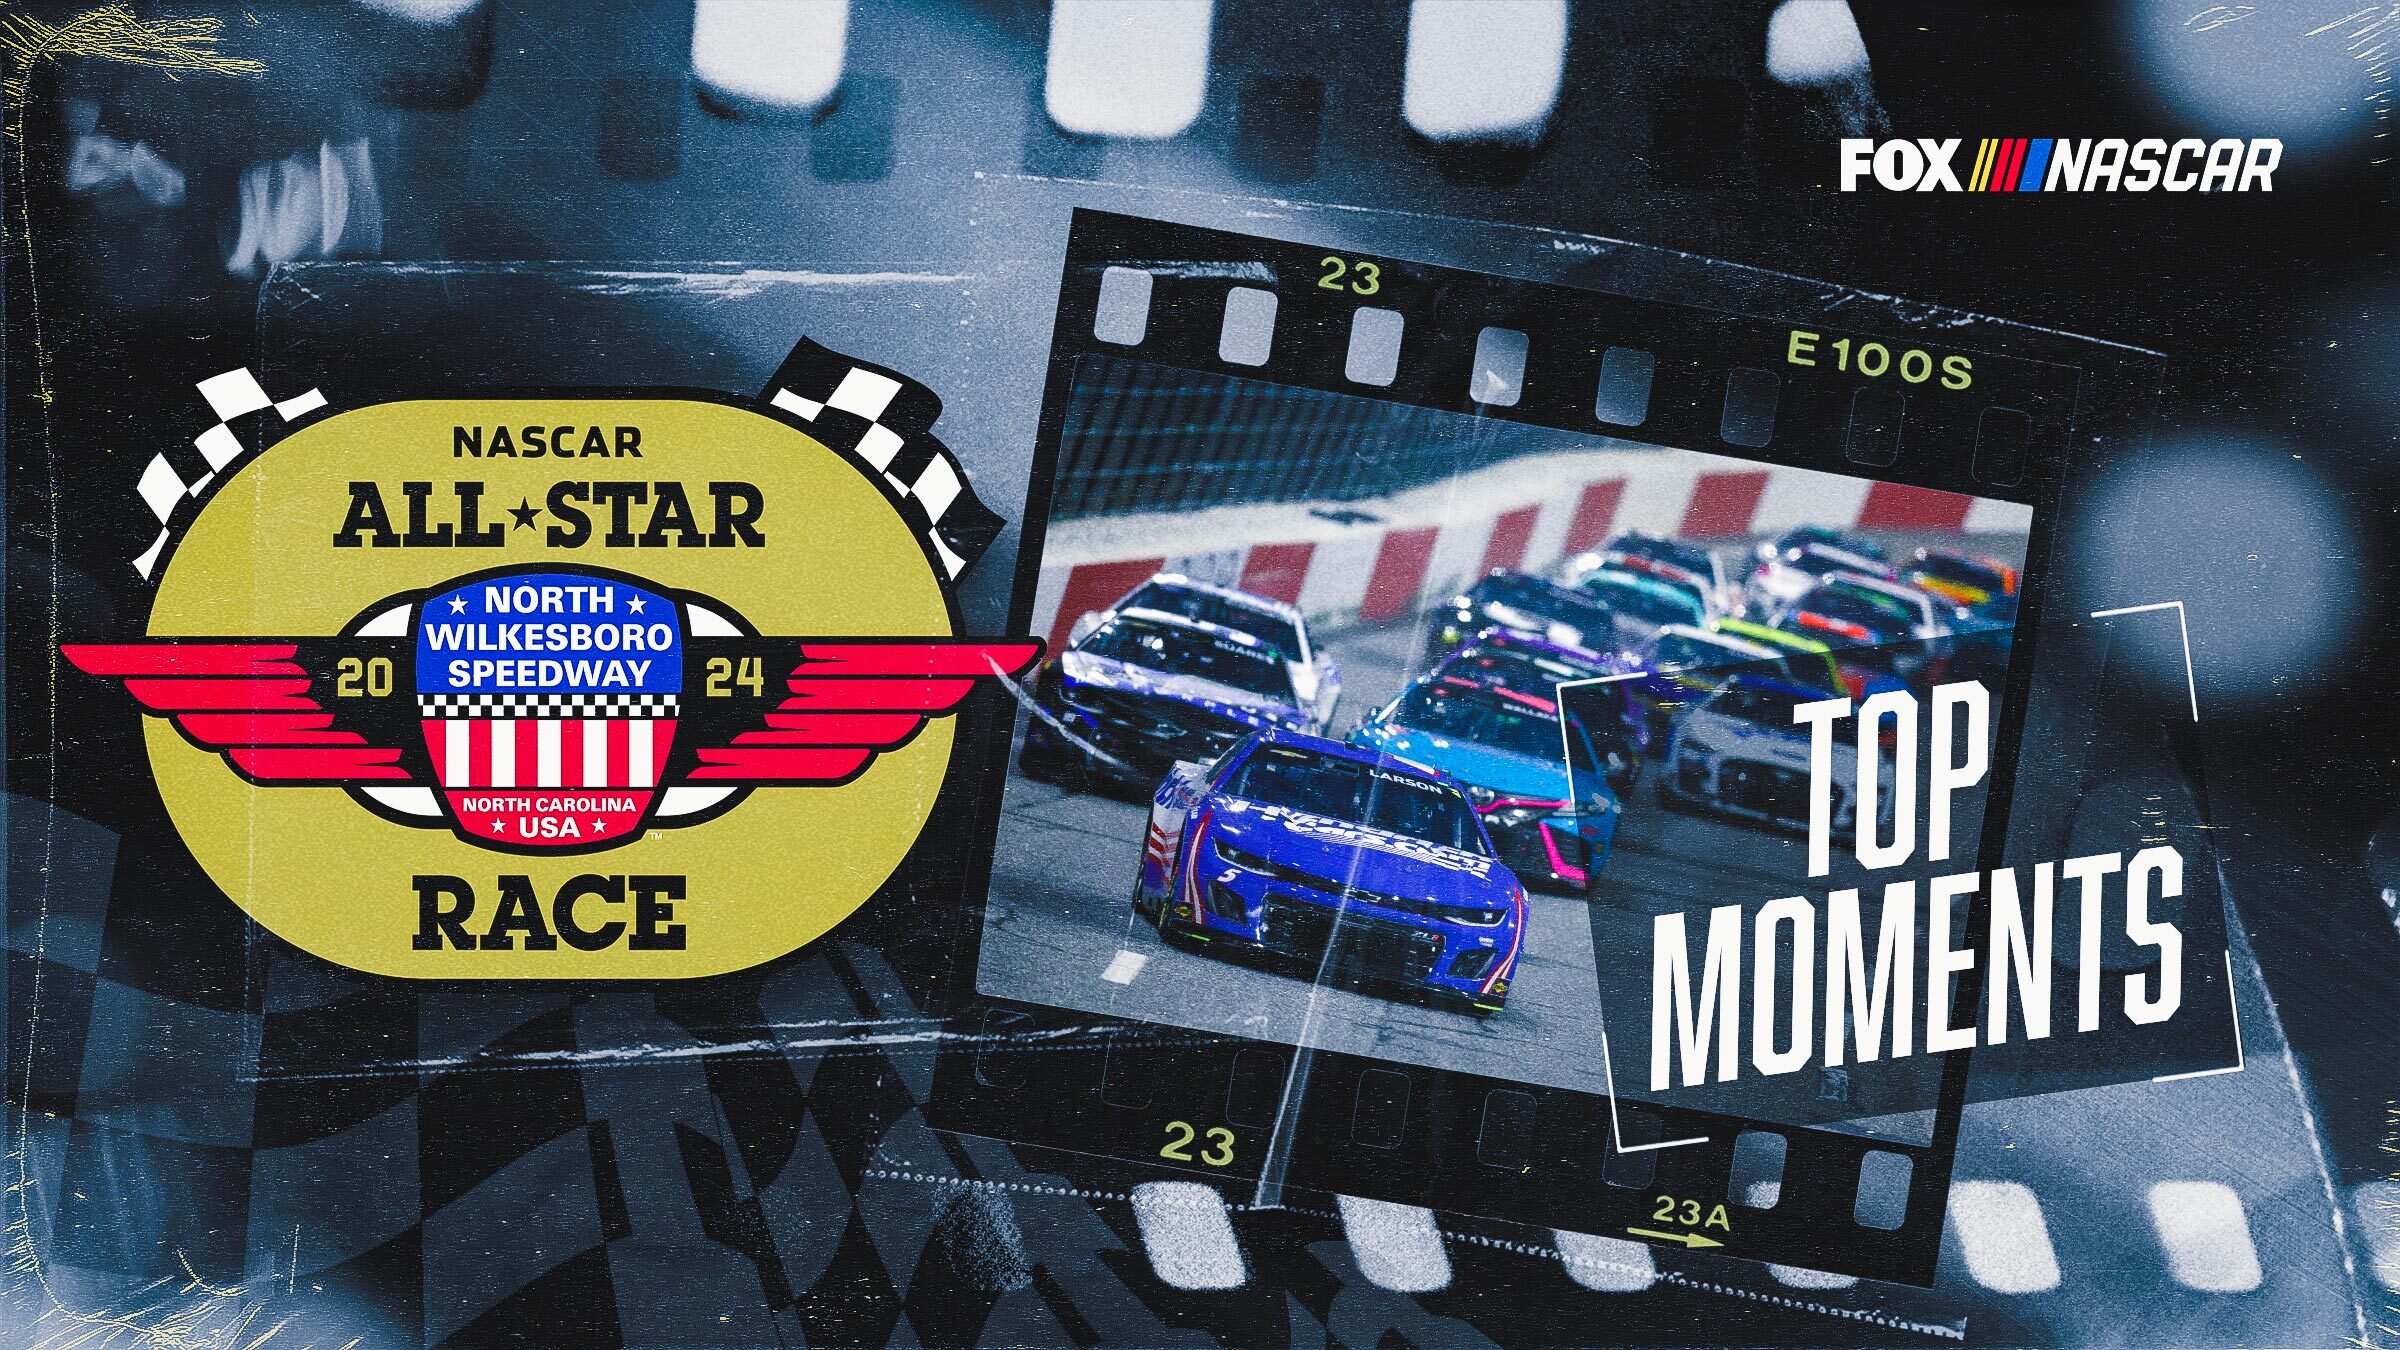 NASCAR live updates: Top moments from the All-Star Race